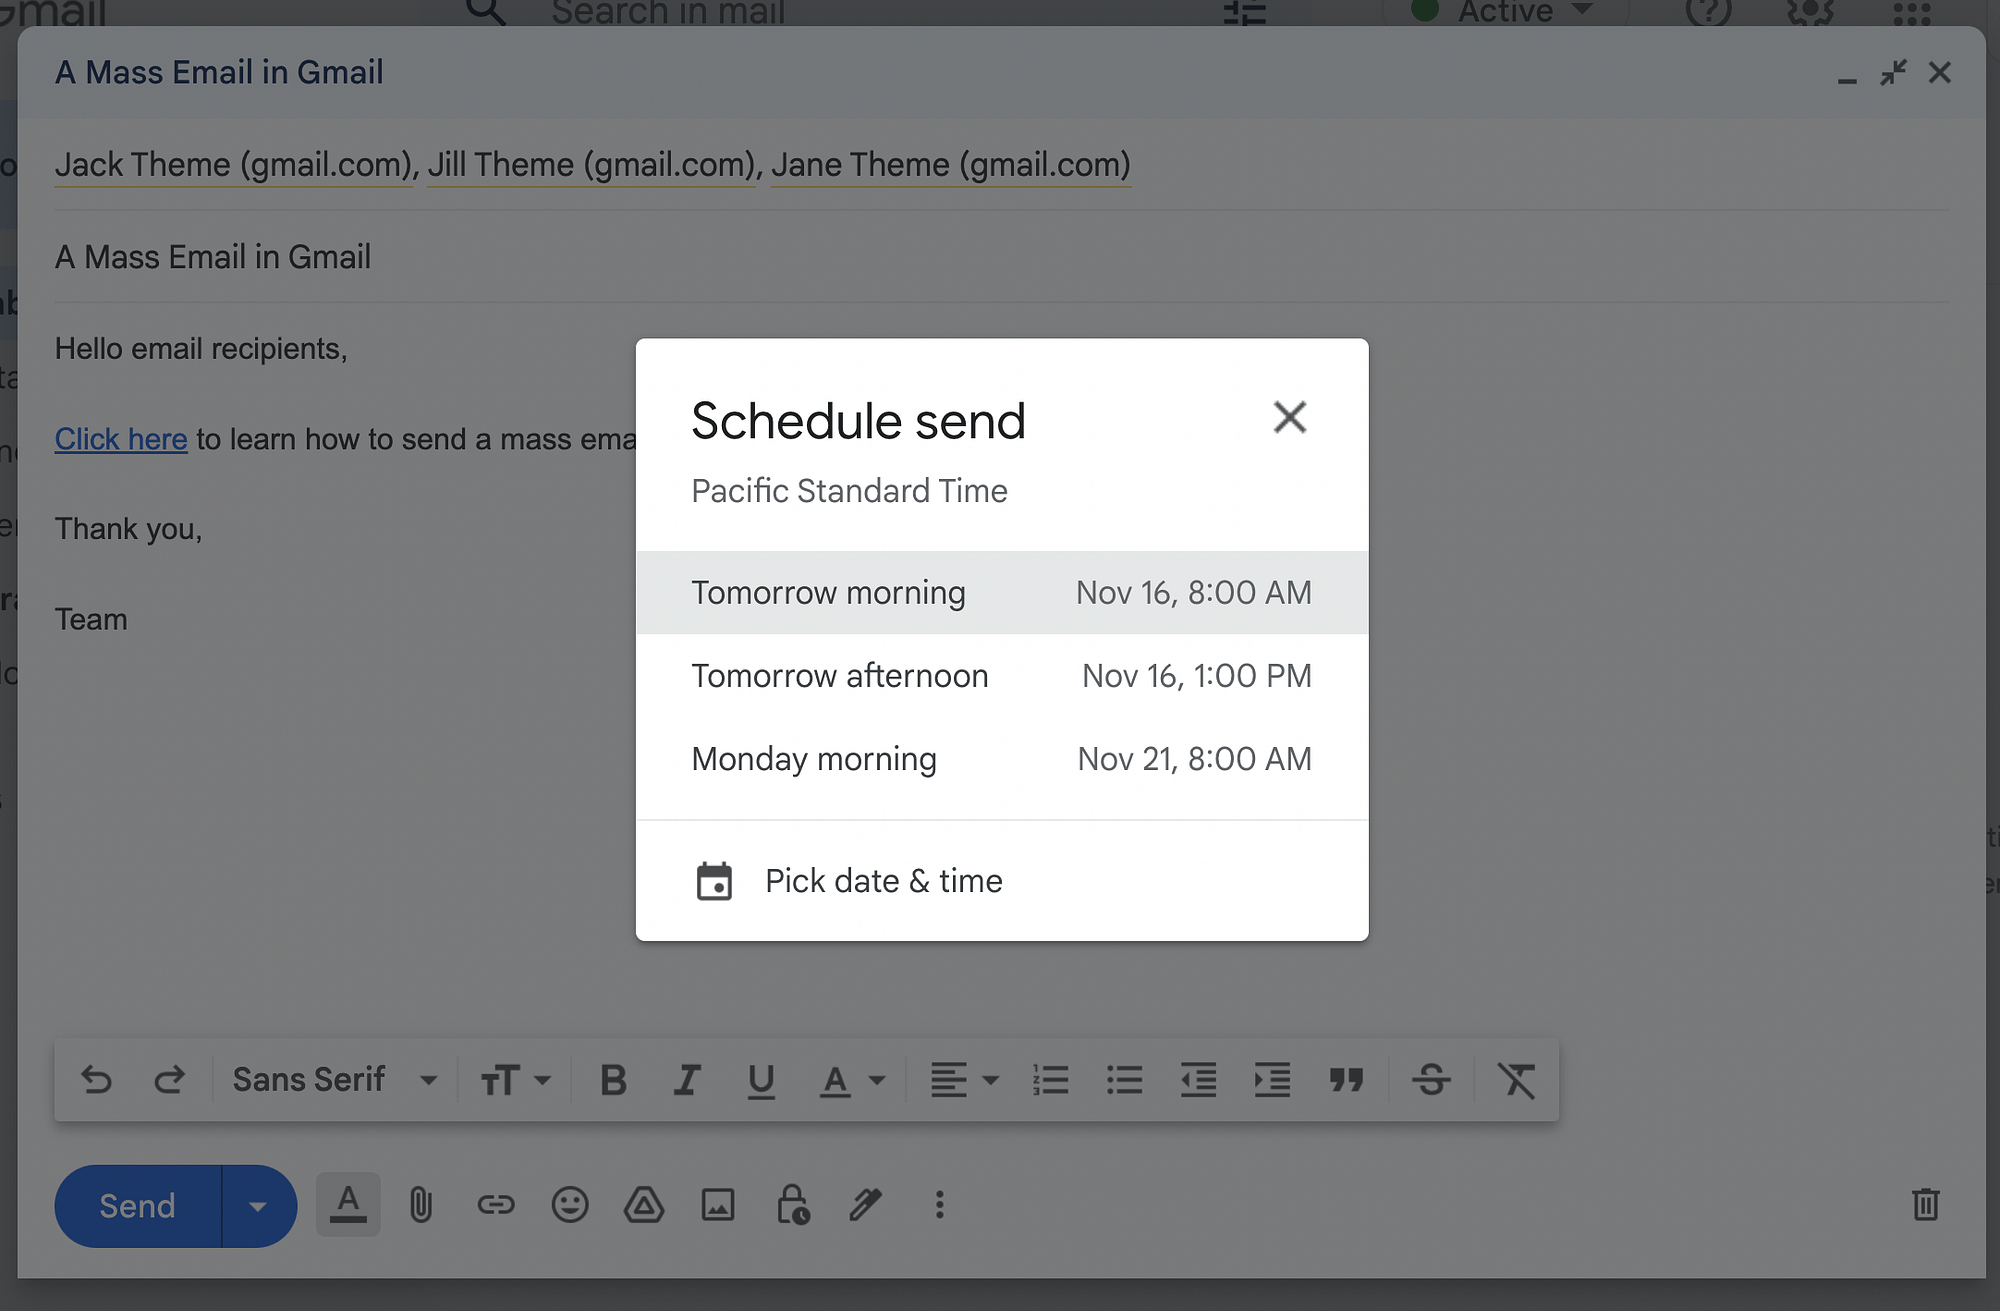 Schedule a mass email in Gmail.